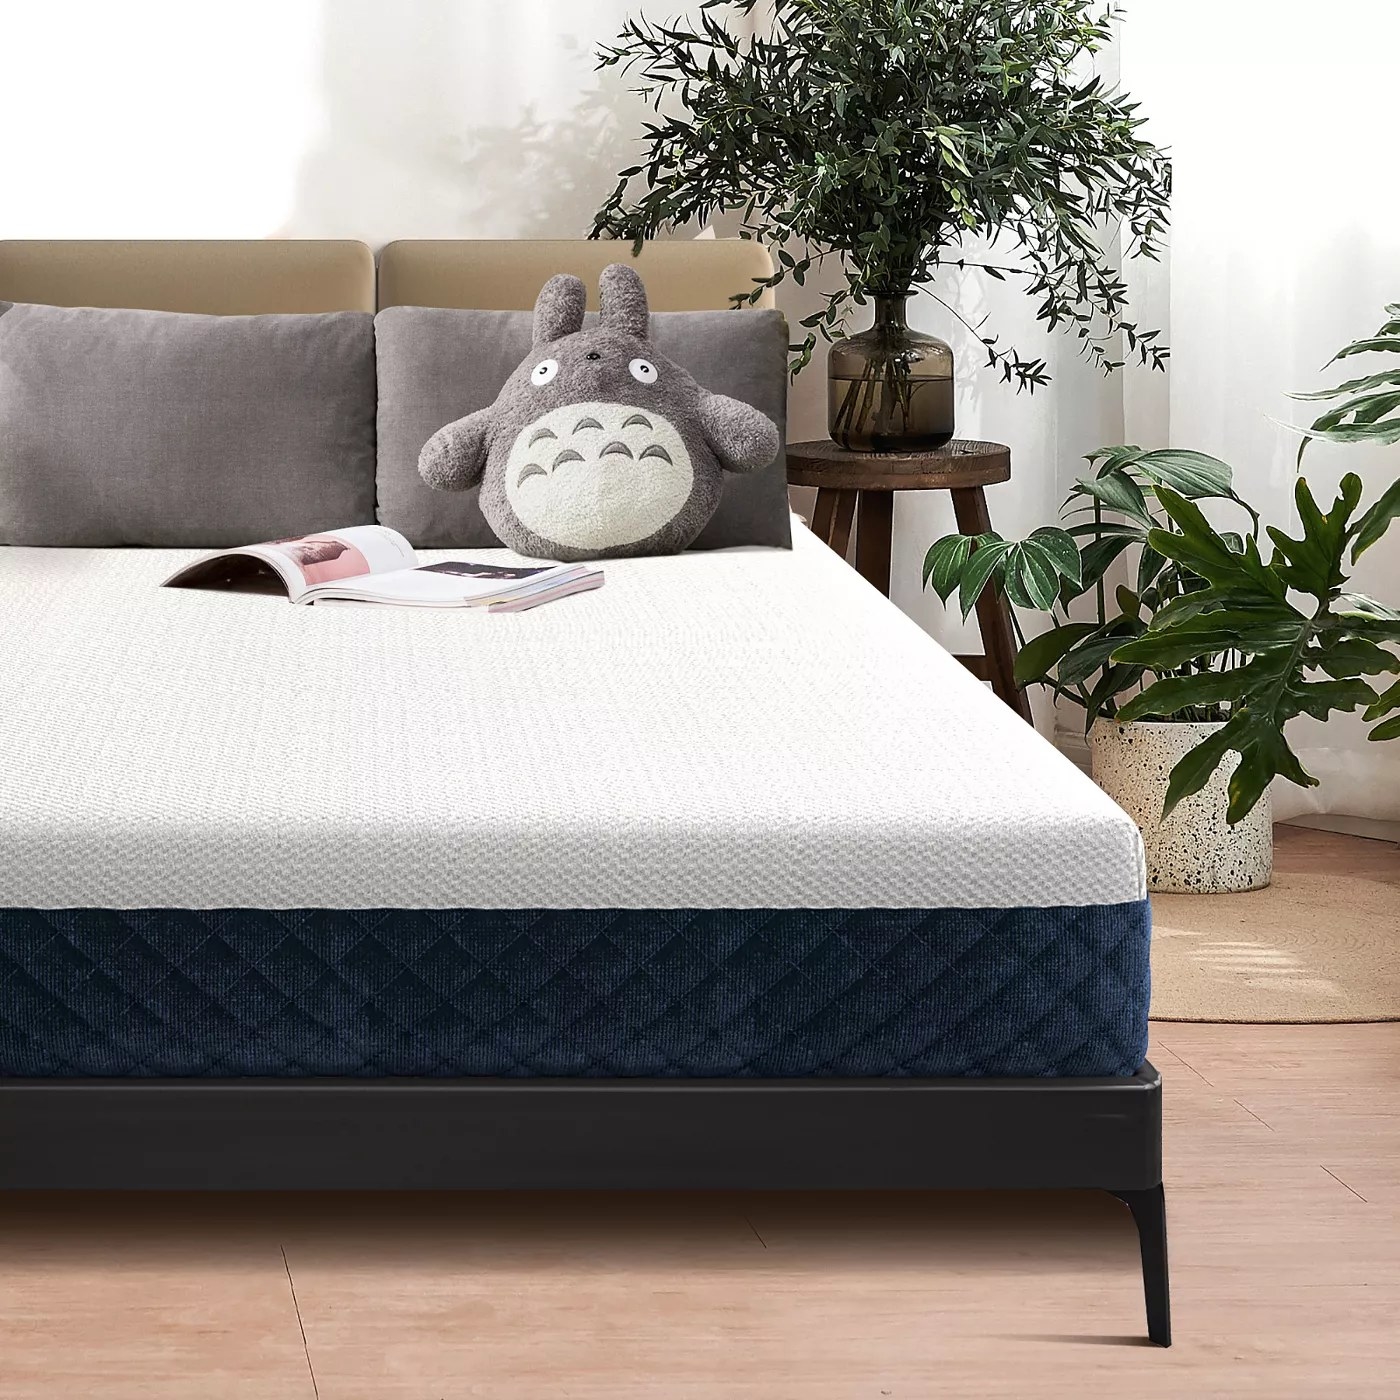 The blue and white mattress